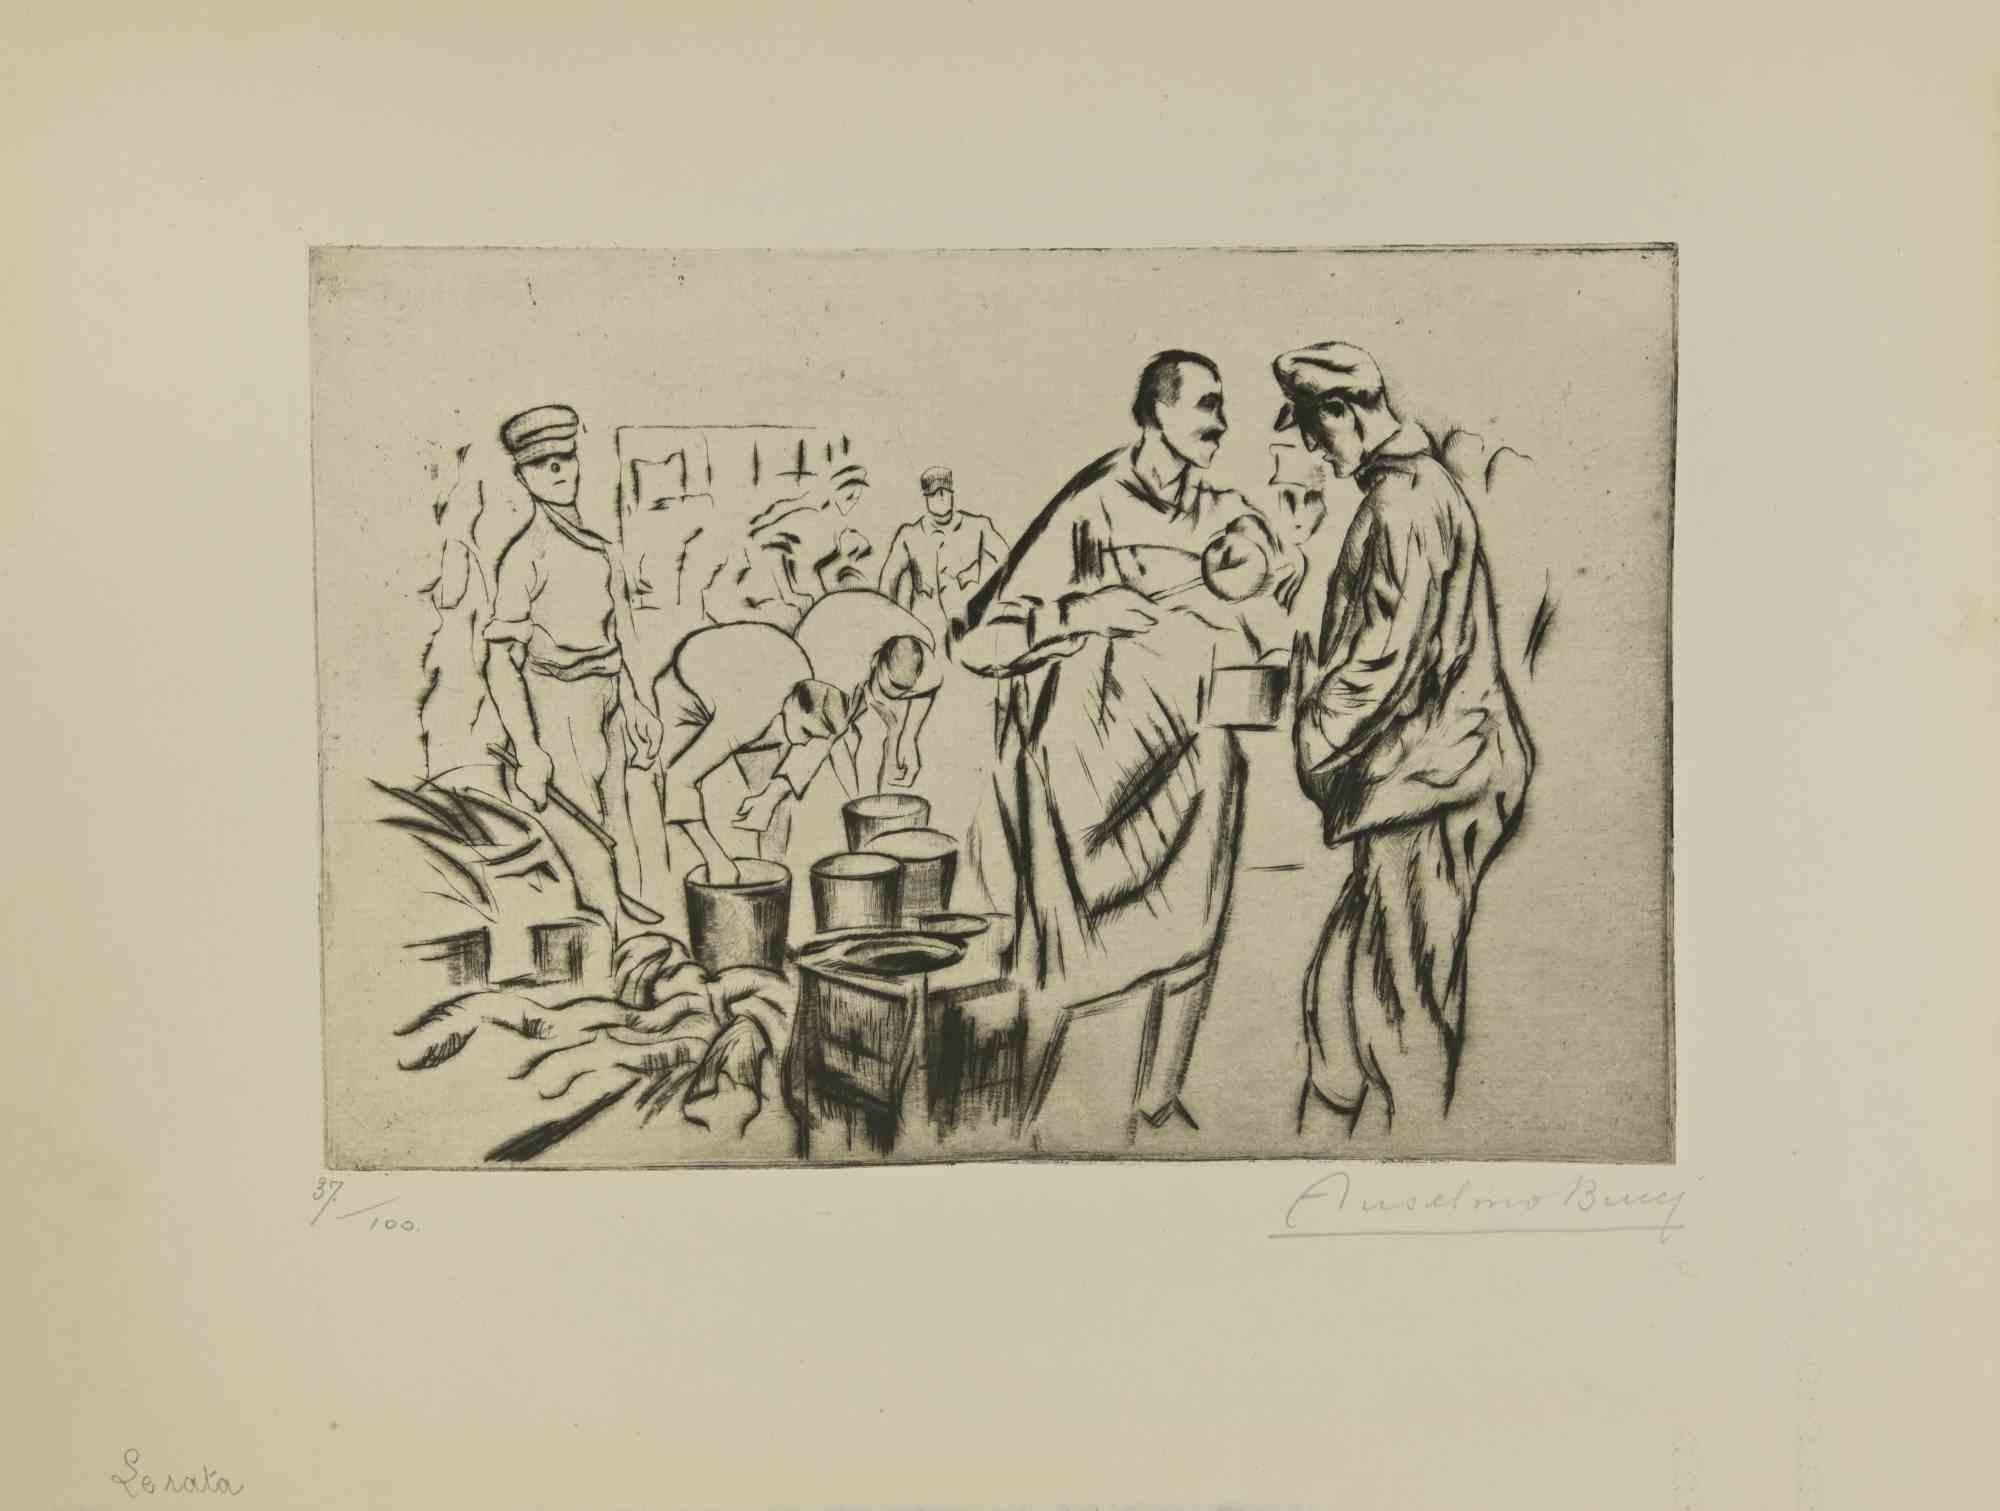  La Soirée - from "Le Croquis du Front Italien"  is an Etching and Drypoint realized by the Italian Artist Anselmo Bucci, in 1917 s.

Hand signed on the right margin . Edition n. 37/100 specimens on Hollande paper. From the collection: “Croquis du